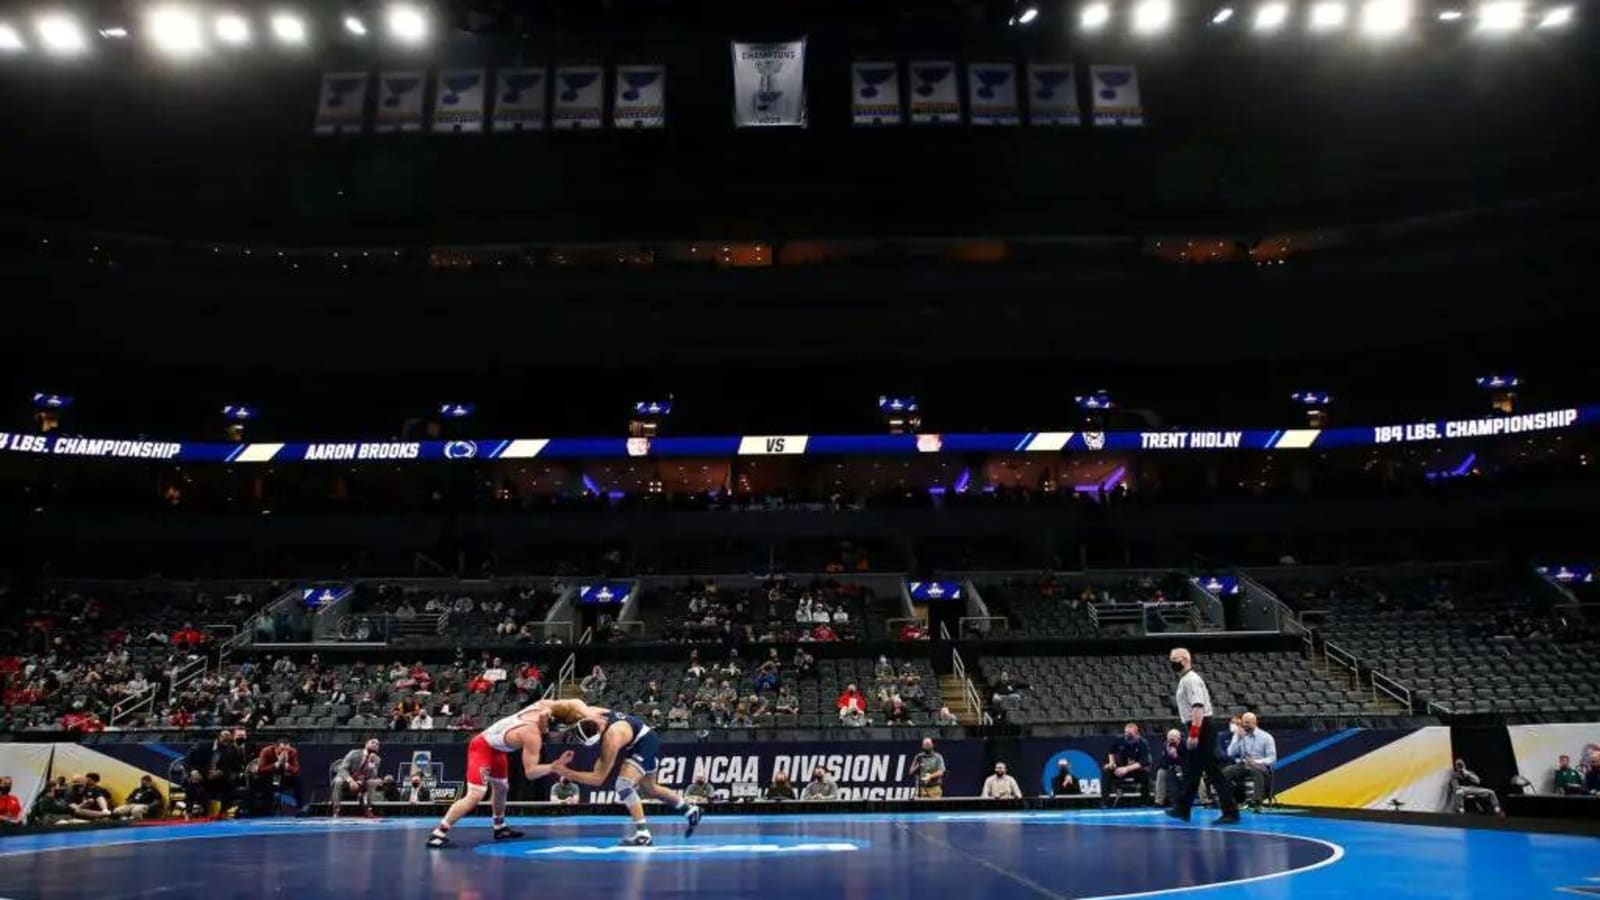 USA Olympic Wrestling Trials: Aaron Brooks Does the Unthinkable, Wins Title at 86 kg